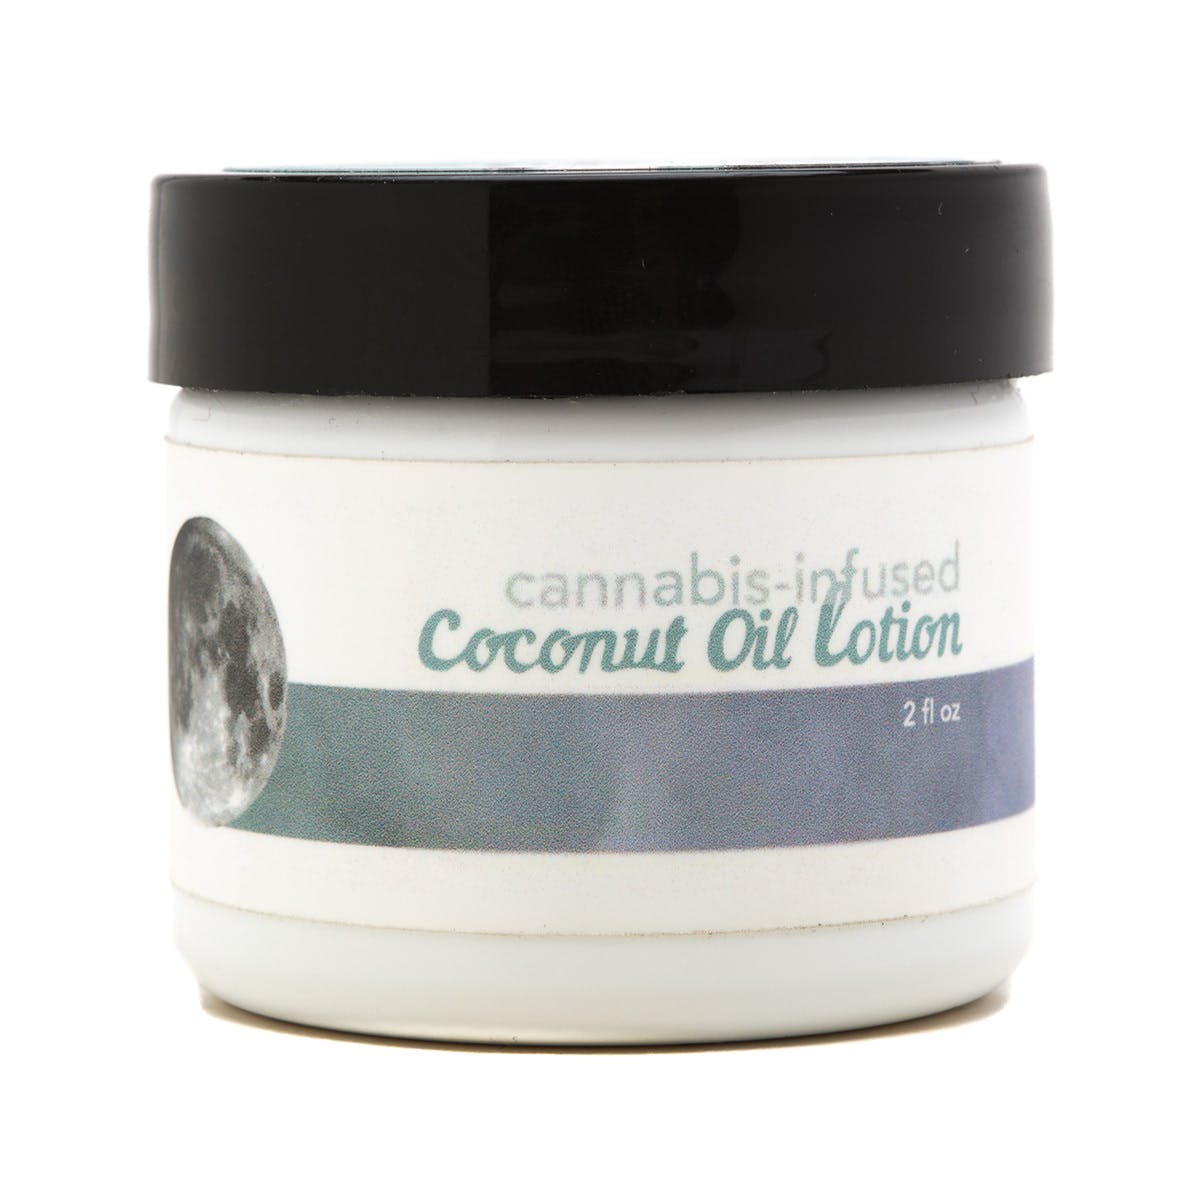 Cannabis-Infused Coconut Oil Lotion 2oz 250mg